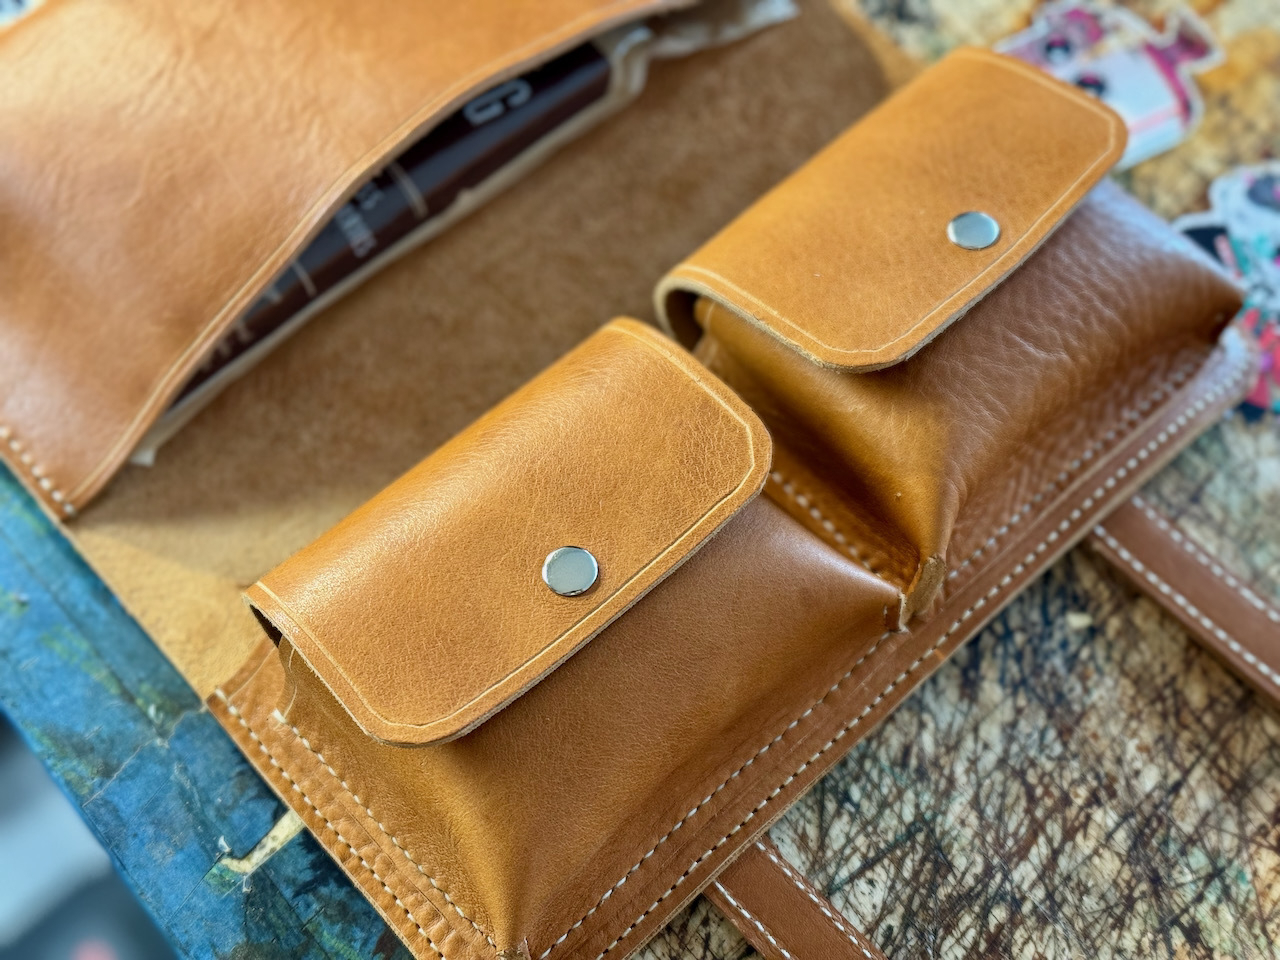 Two accessory pockets shown closed on leather cigar case. Closure utilizes magnetic snaps.